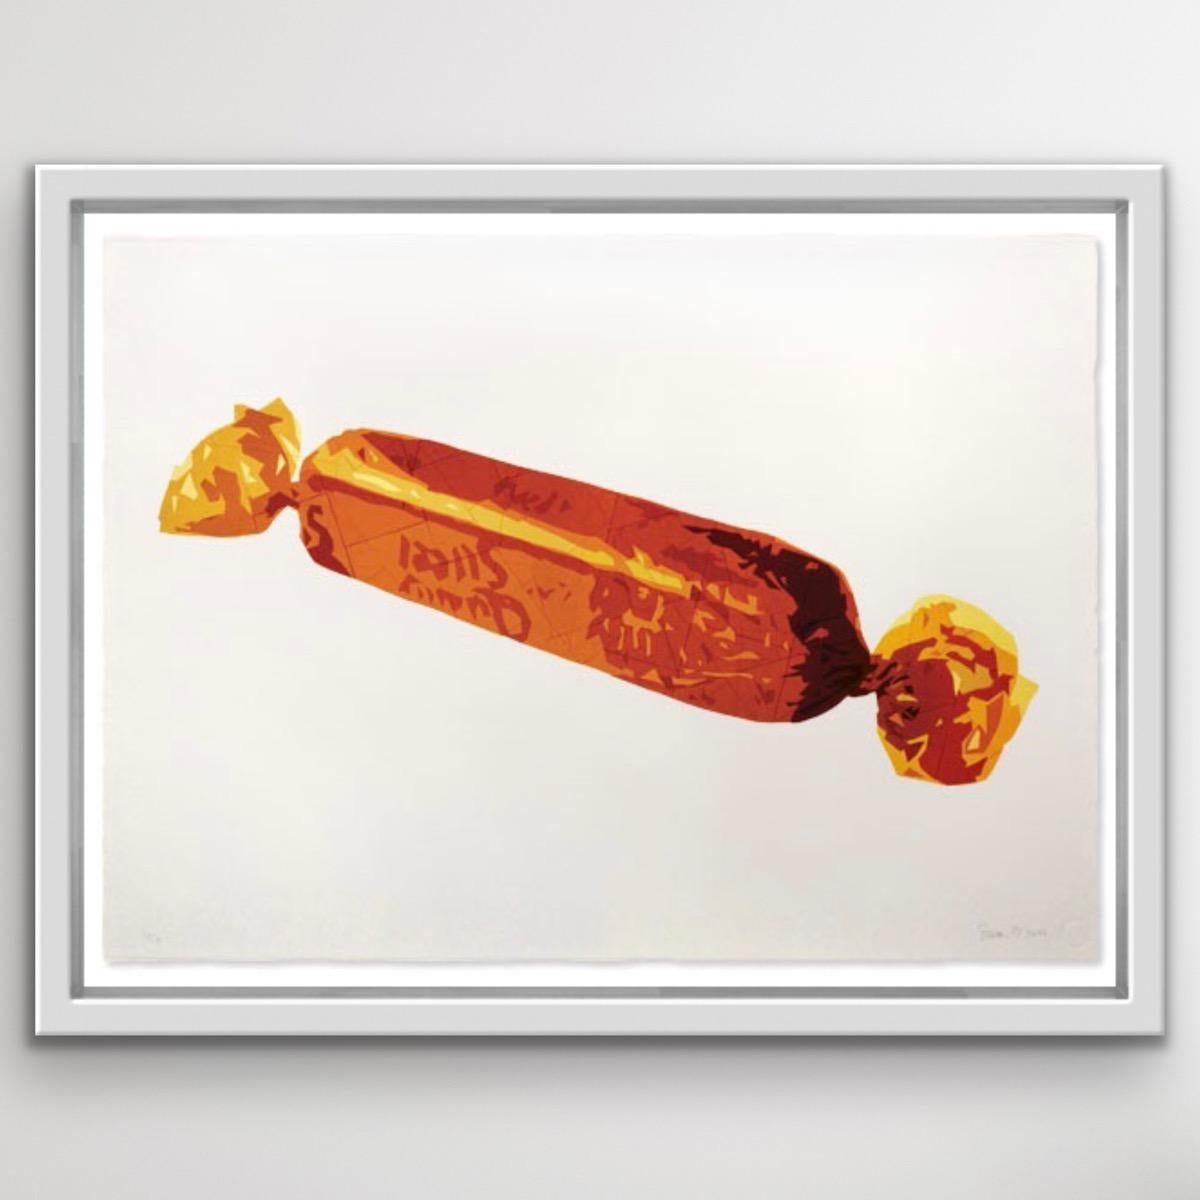 Limited edition print of the original ‘Gold Finger’ Quality Street Toffee Finger image by Simon Dry. The first print onto Fabriano paper is over painted in white by Simon and then over printed again to create a uniquely textured hand finished